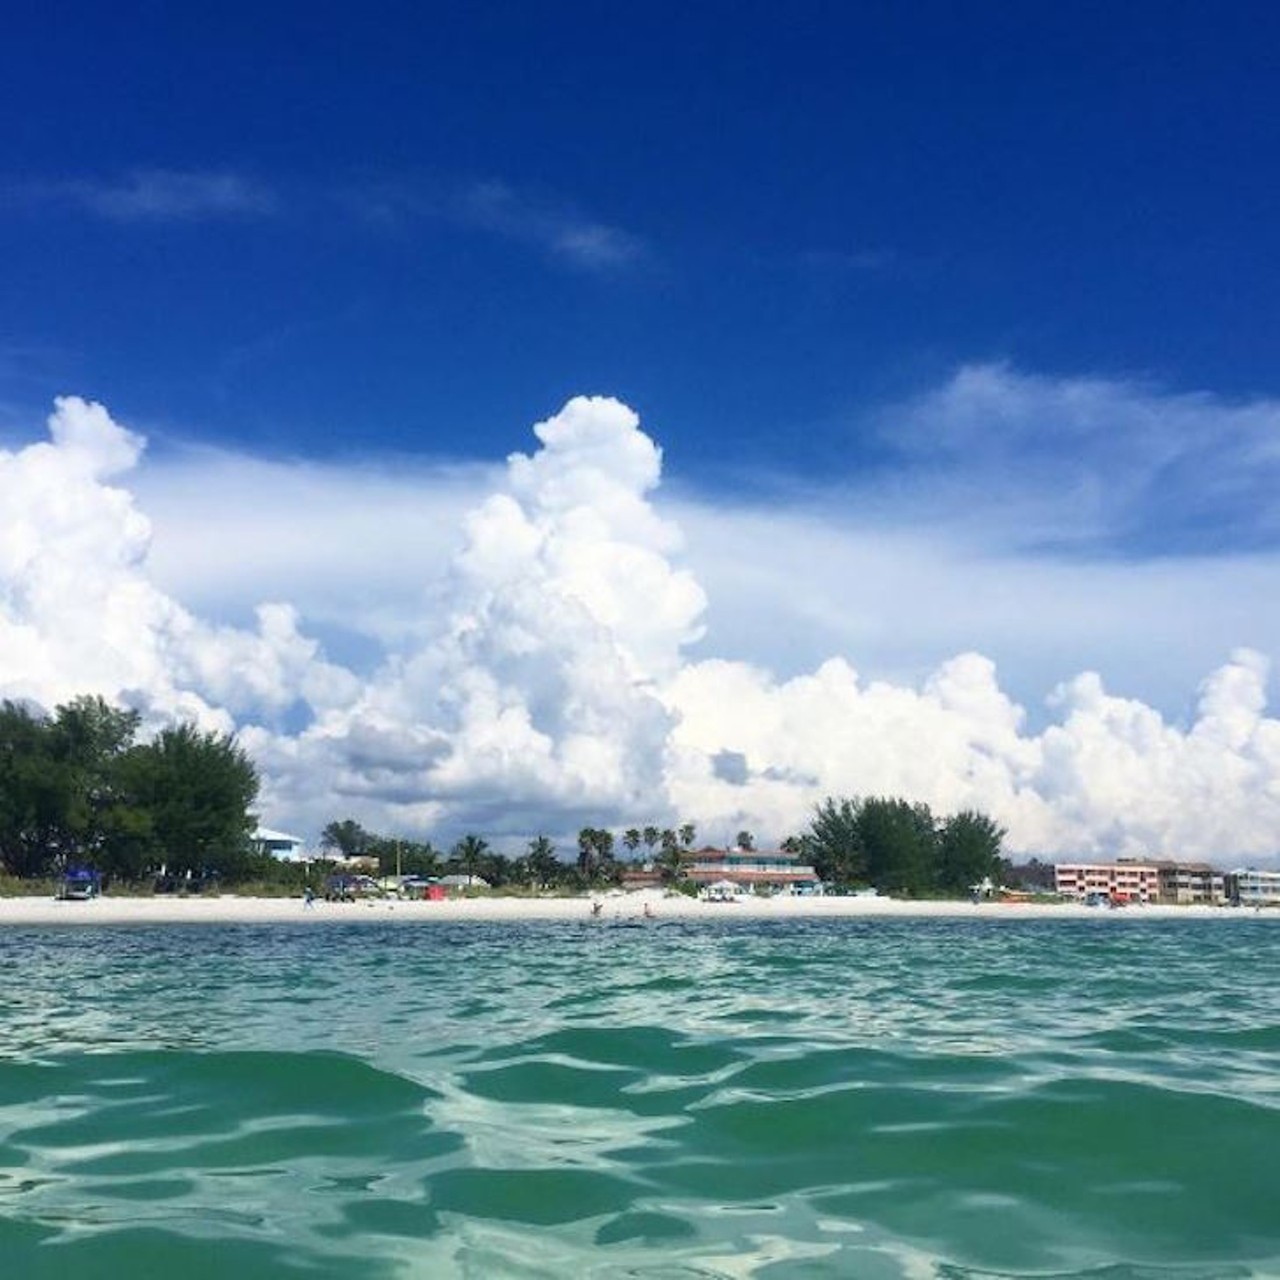 Anna Maria Island
Driving distance from Orlando: 2 hours 30 minutes 
With it's broad beaches and relative distance from larger metropolitan areas, Anne Marie Island is a perfect place for some solitary beach time.
Photo via jlipton/Instagram